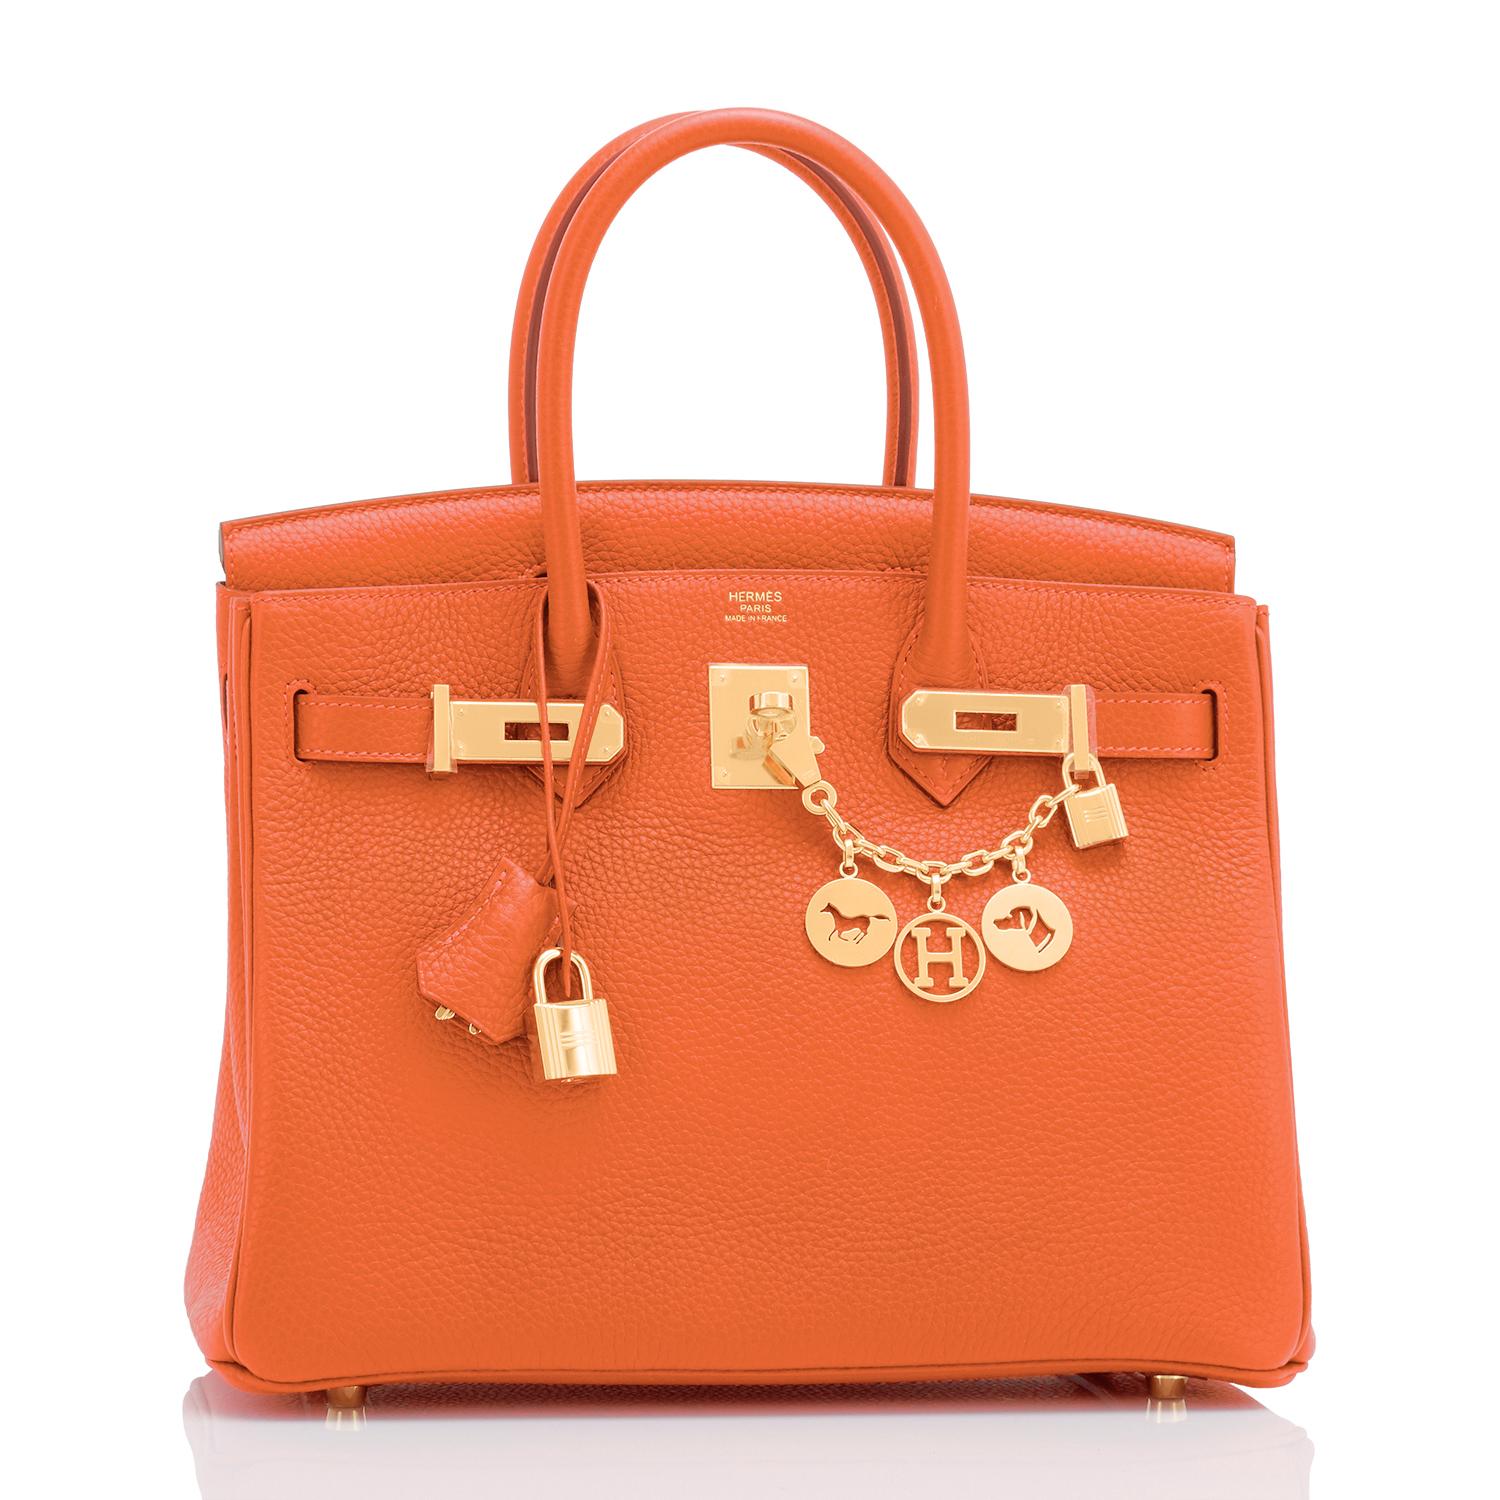 Hermes Feu Orange 30cm Birkin Gold Hardware Y Stamp, 2020
Brand New in Box. Store fresh. Pristine condition (with plastic on hardware).
Just purchased from Hermes store. Bag bears new interior 2020 Y stamp.
Perfect gift! Comes with keys, lock,